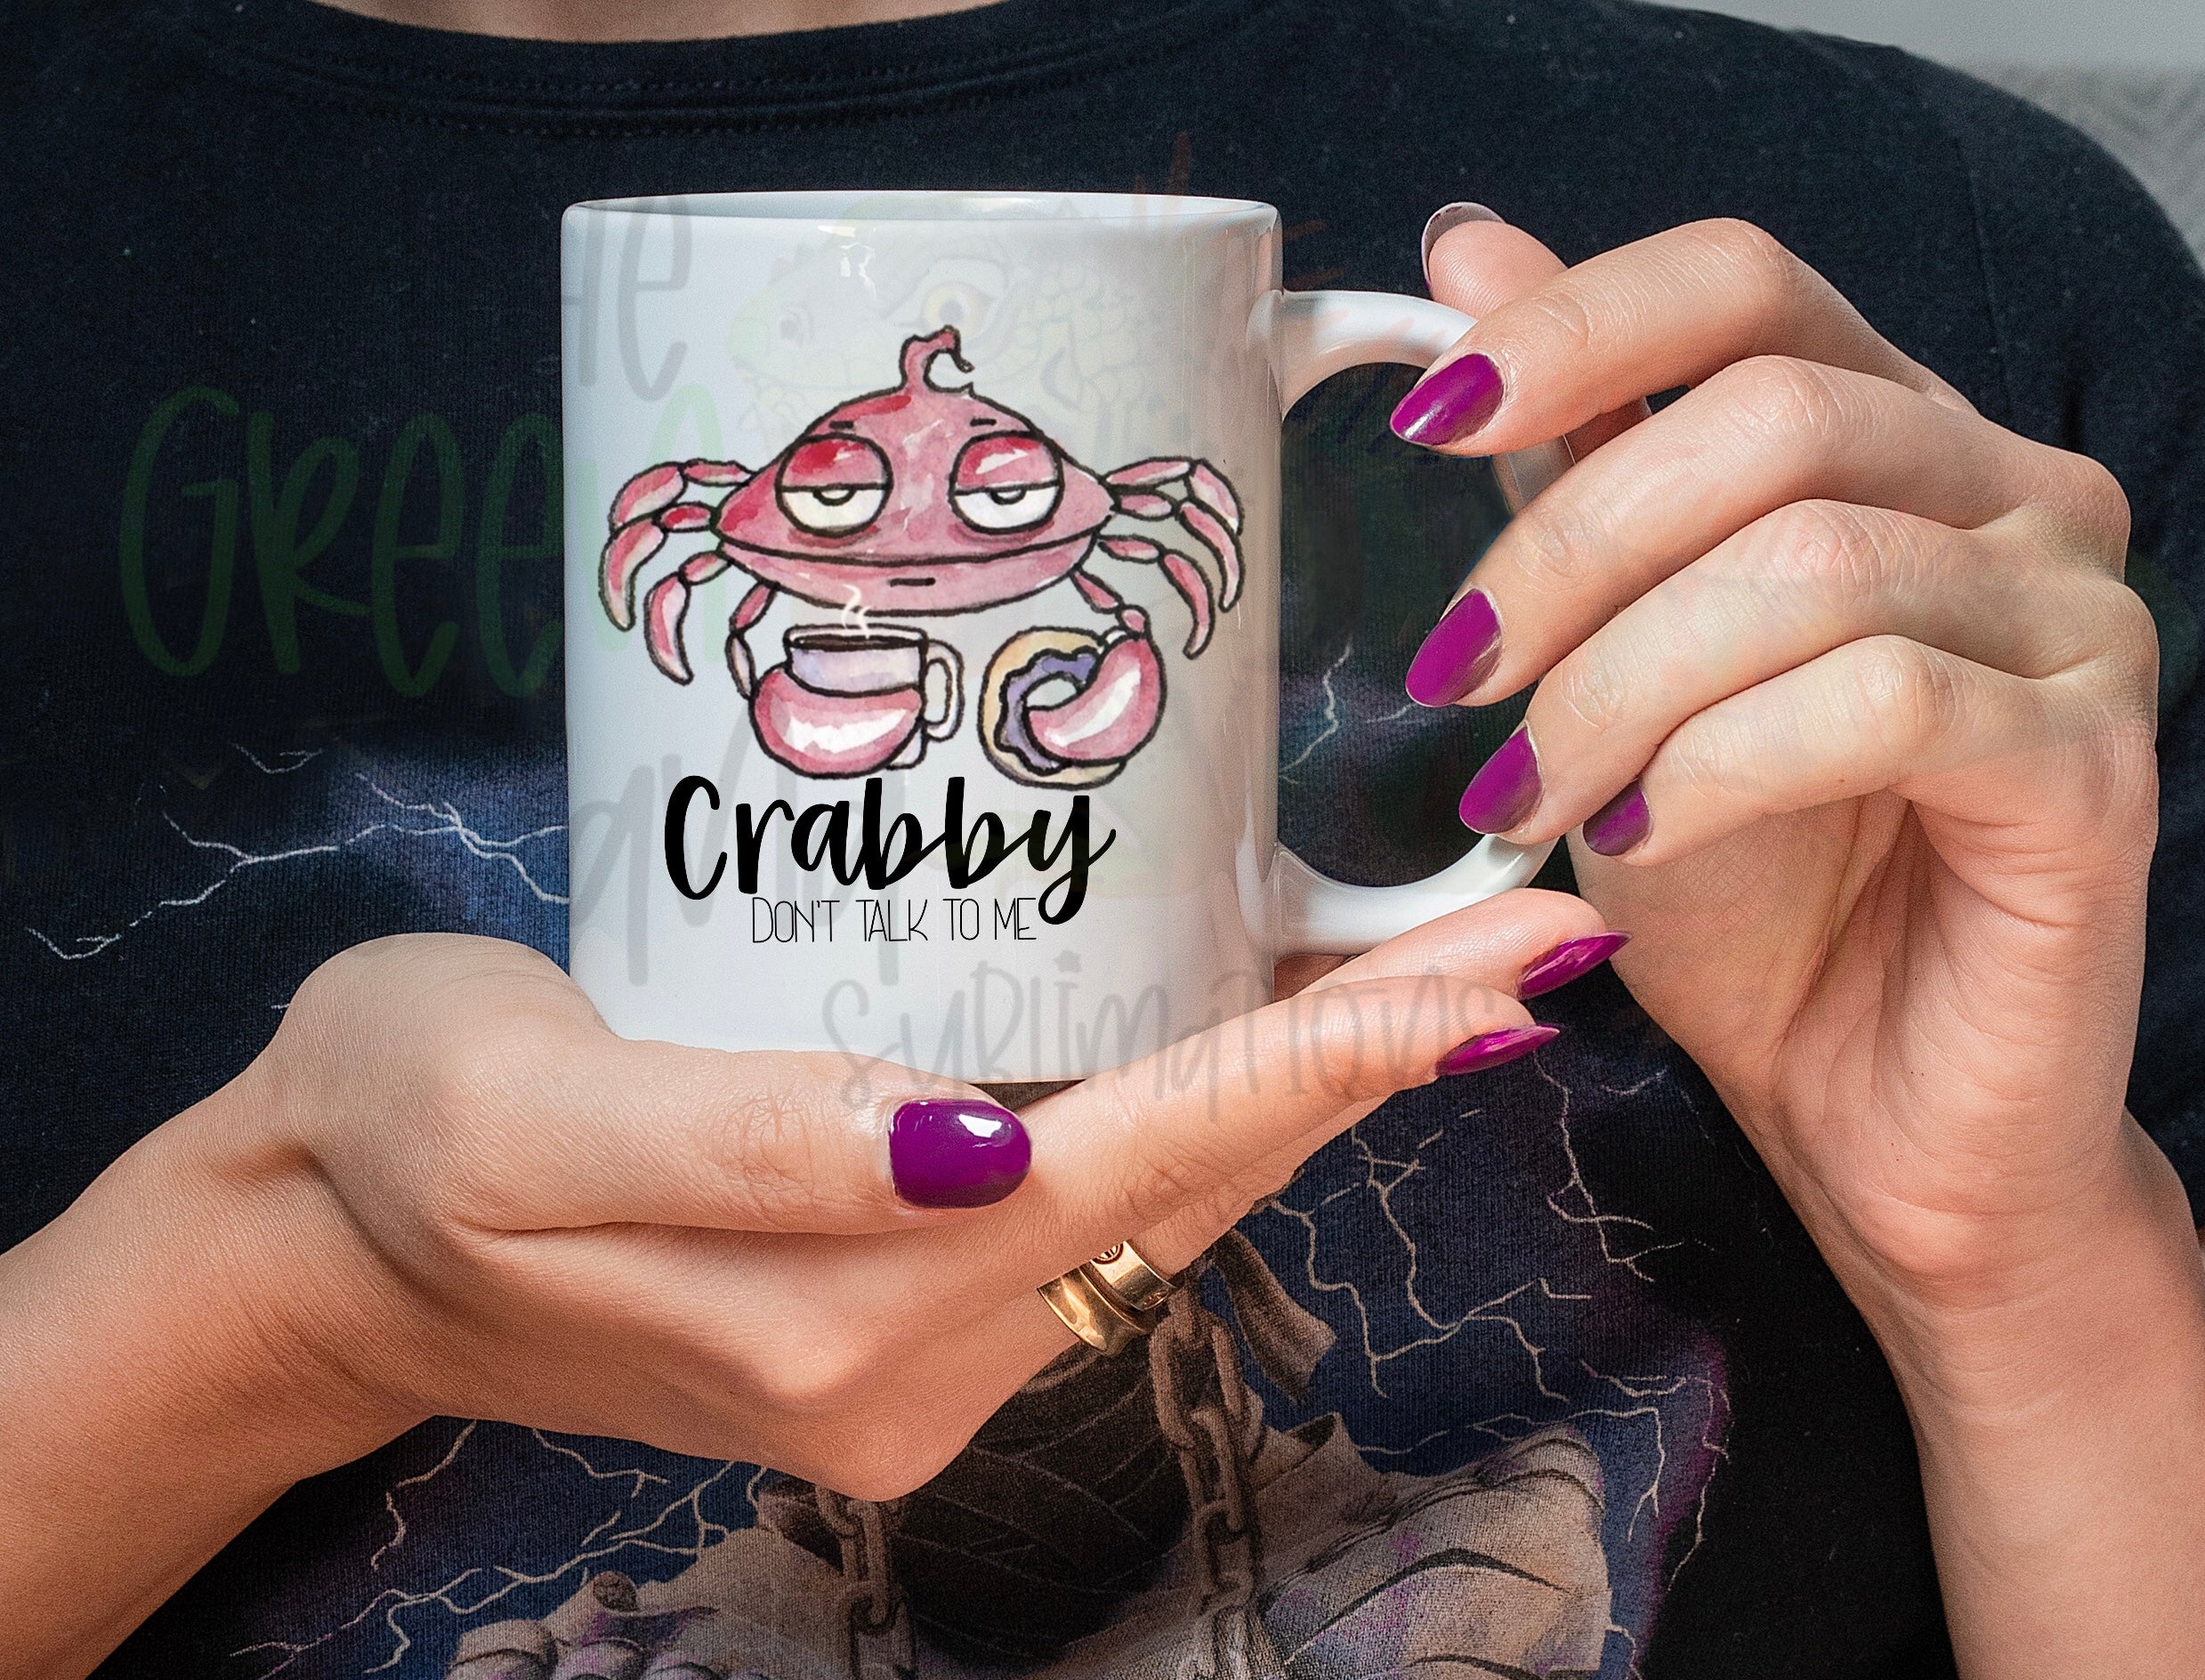 Crabby. Don’t talk to me - DIGITAL